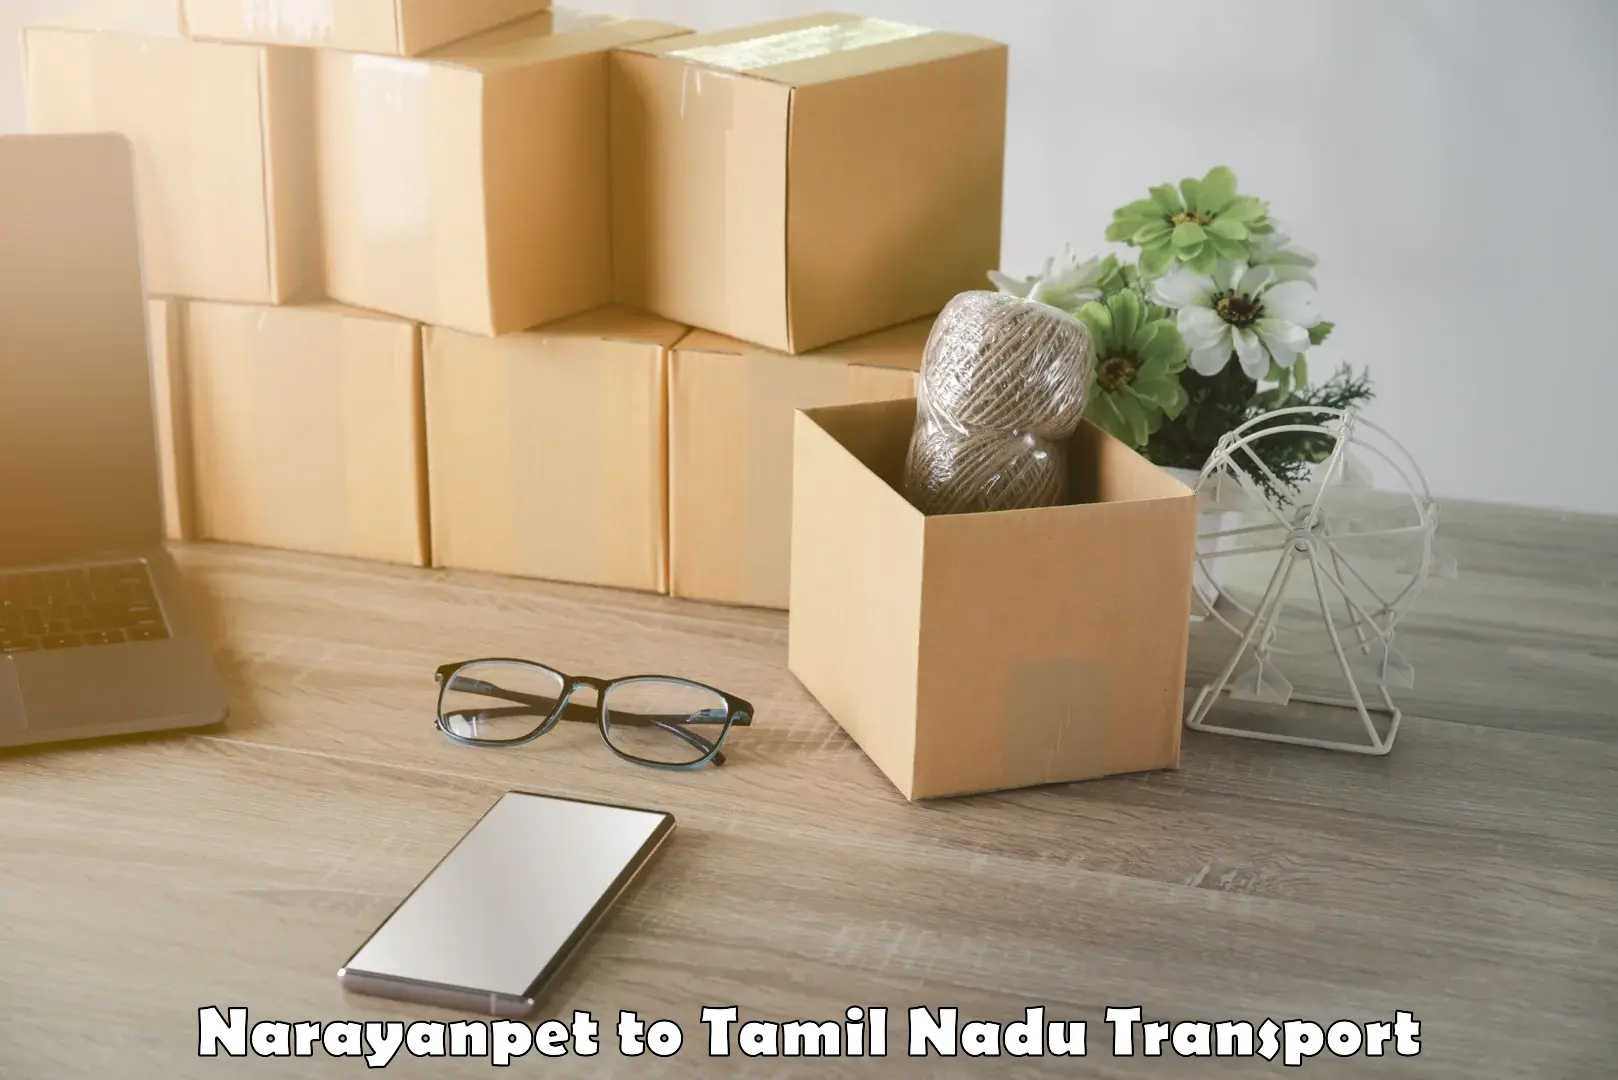 Cargo transport services Narayanpet to Cheyyar